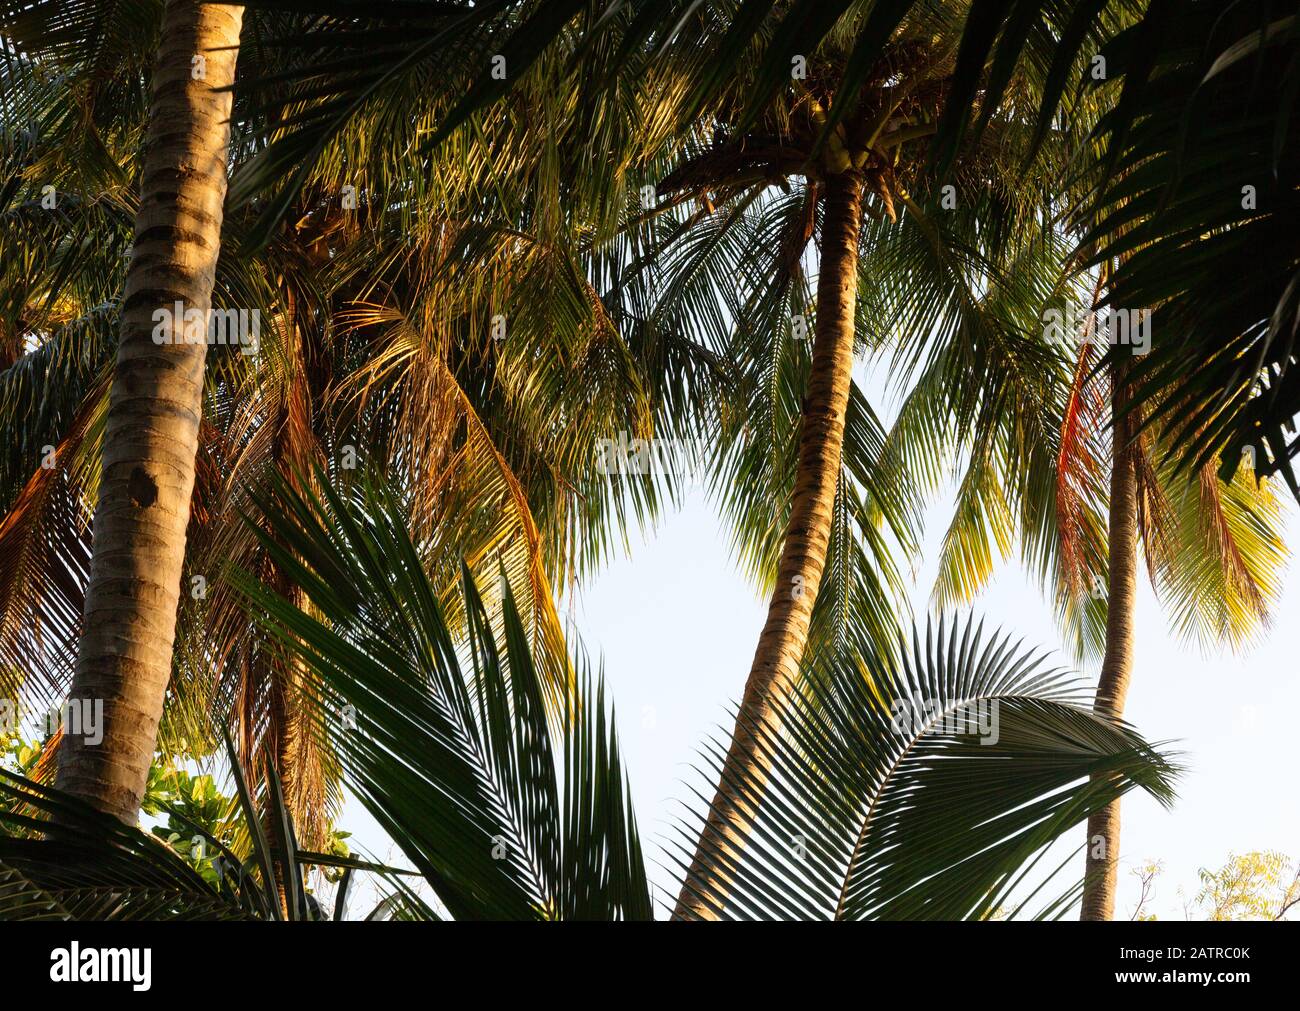 Palm trees abstract, palm fronds and palm leaves,  as an abstract natural background, the Maldives Asia, Stock Photo